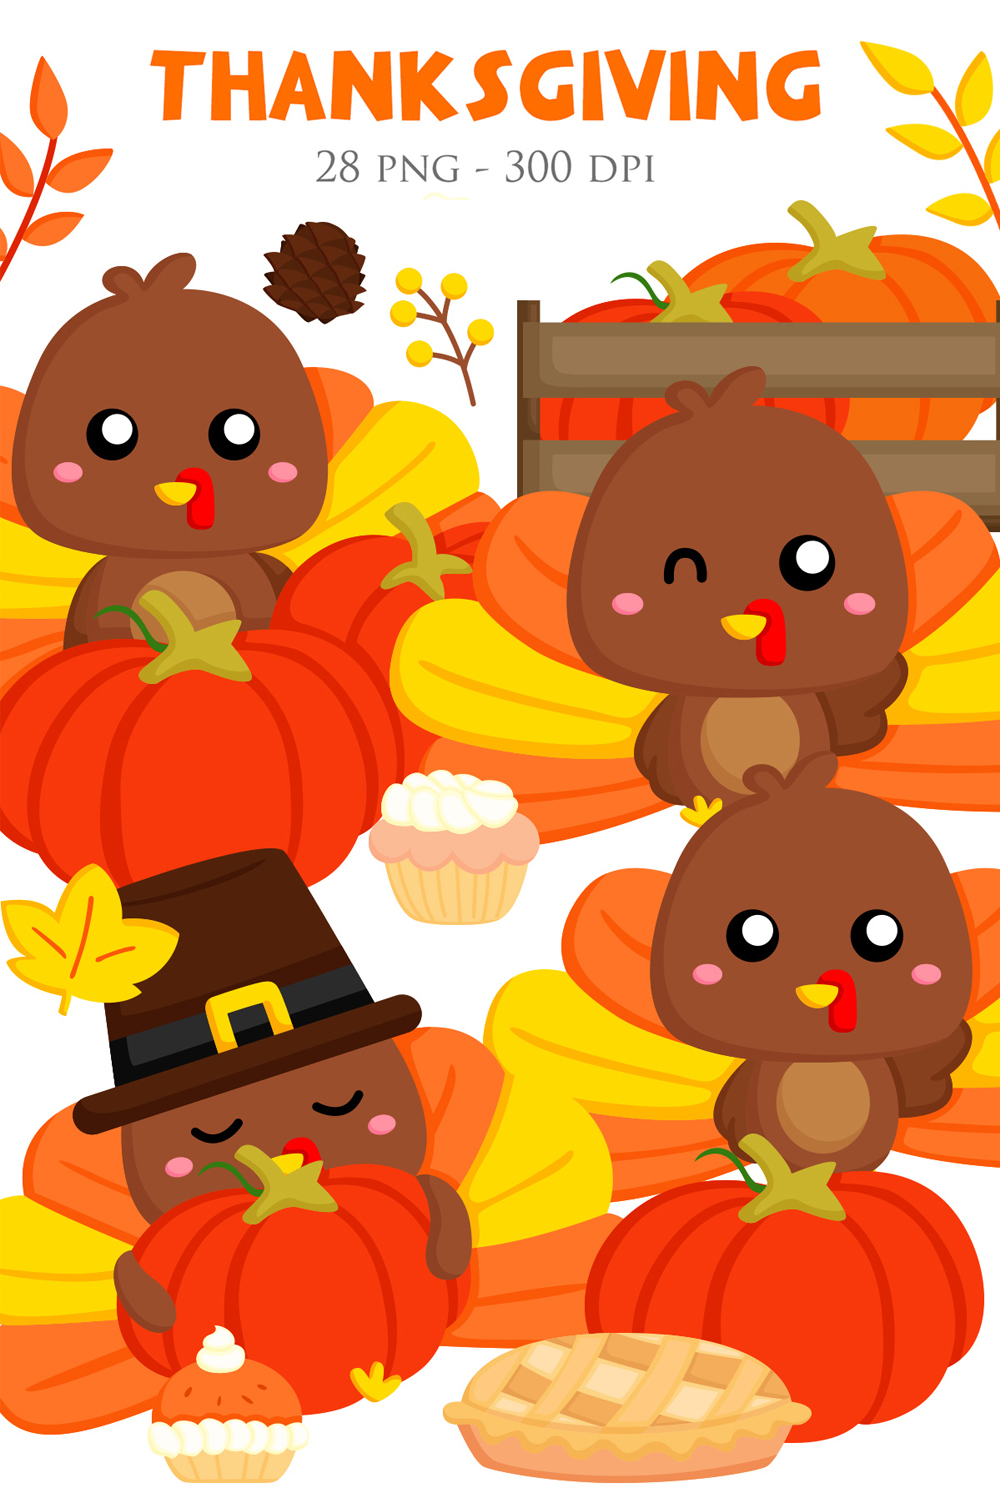 Thanksgiving Cute Holiday Turkey Illustrations - pinterest image preview.